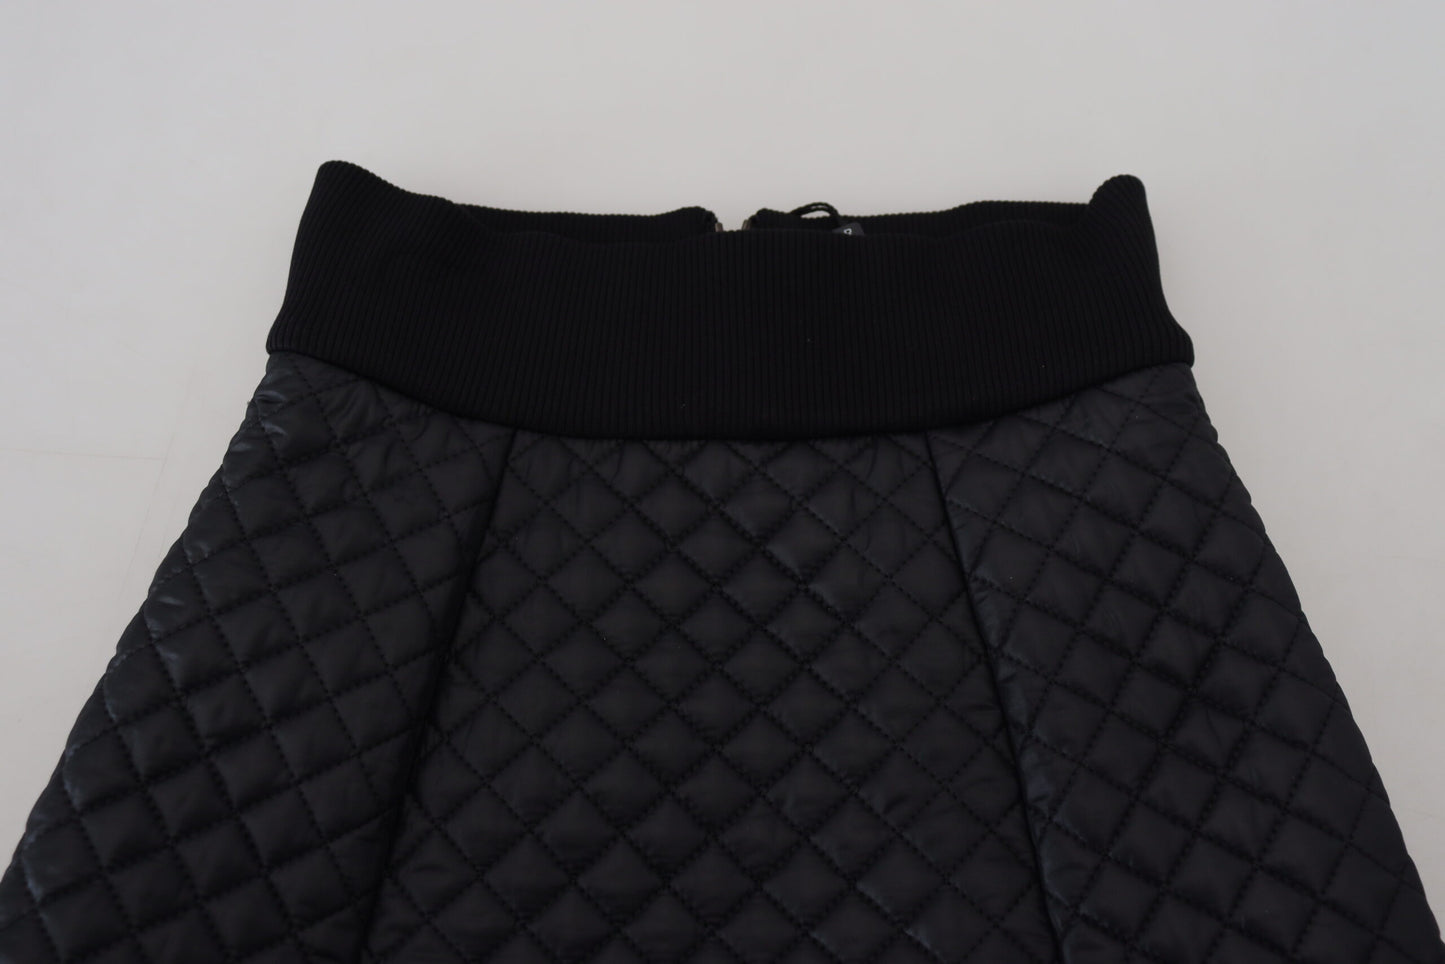 Black Quilted High Waist Hot Pants Shorts - Designed by Dolce & Gabbana Available to Buy at a Discounted Price on Moon Behind The Hill Online Designer Discount Store